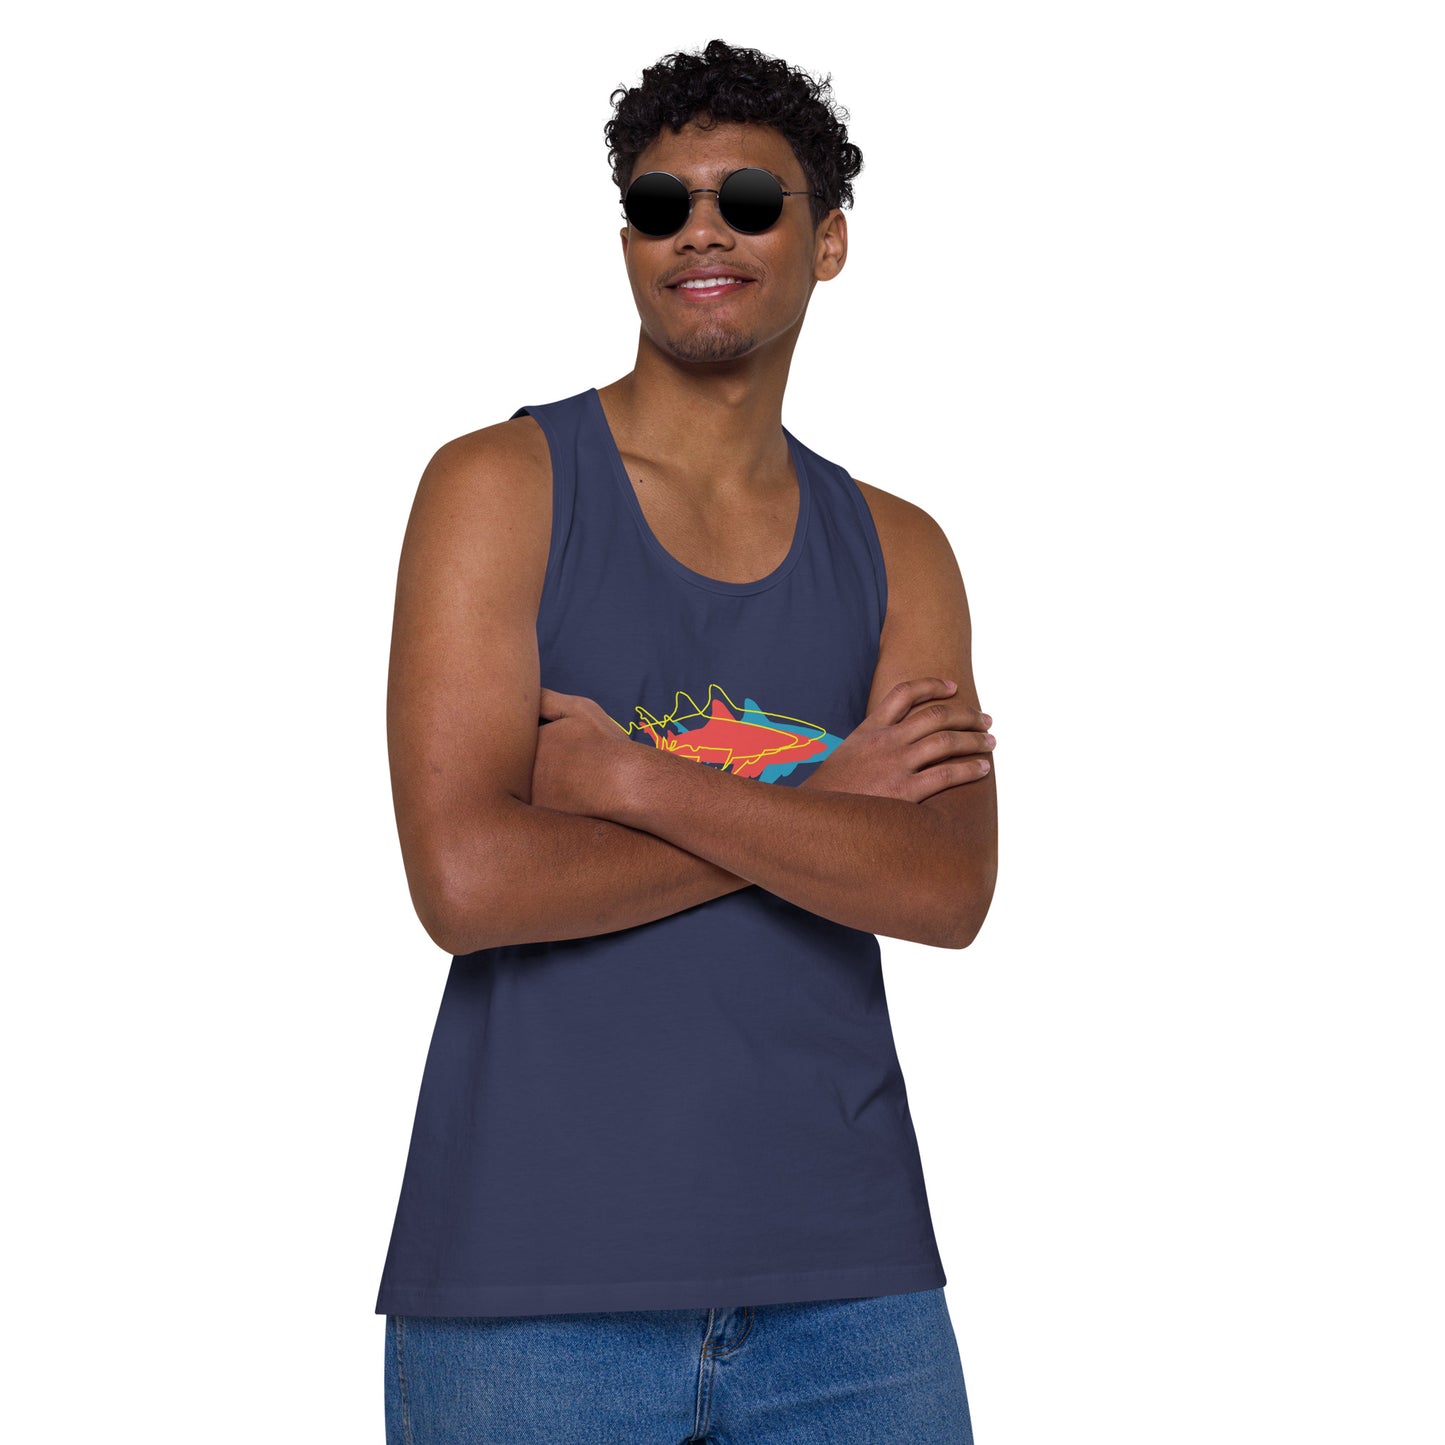 STAY THE COURSE Premium Tank Top